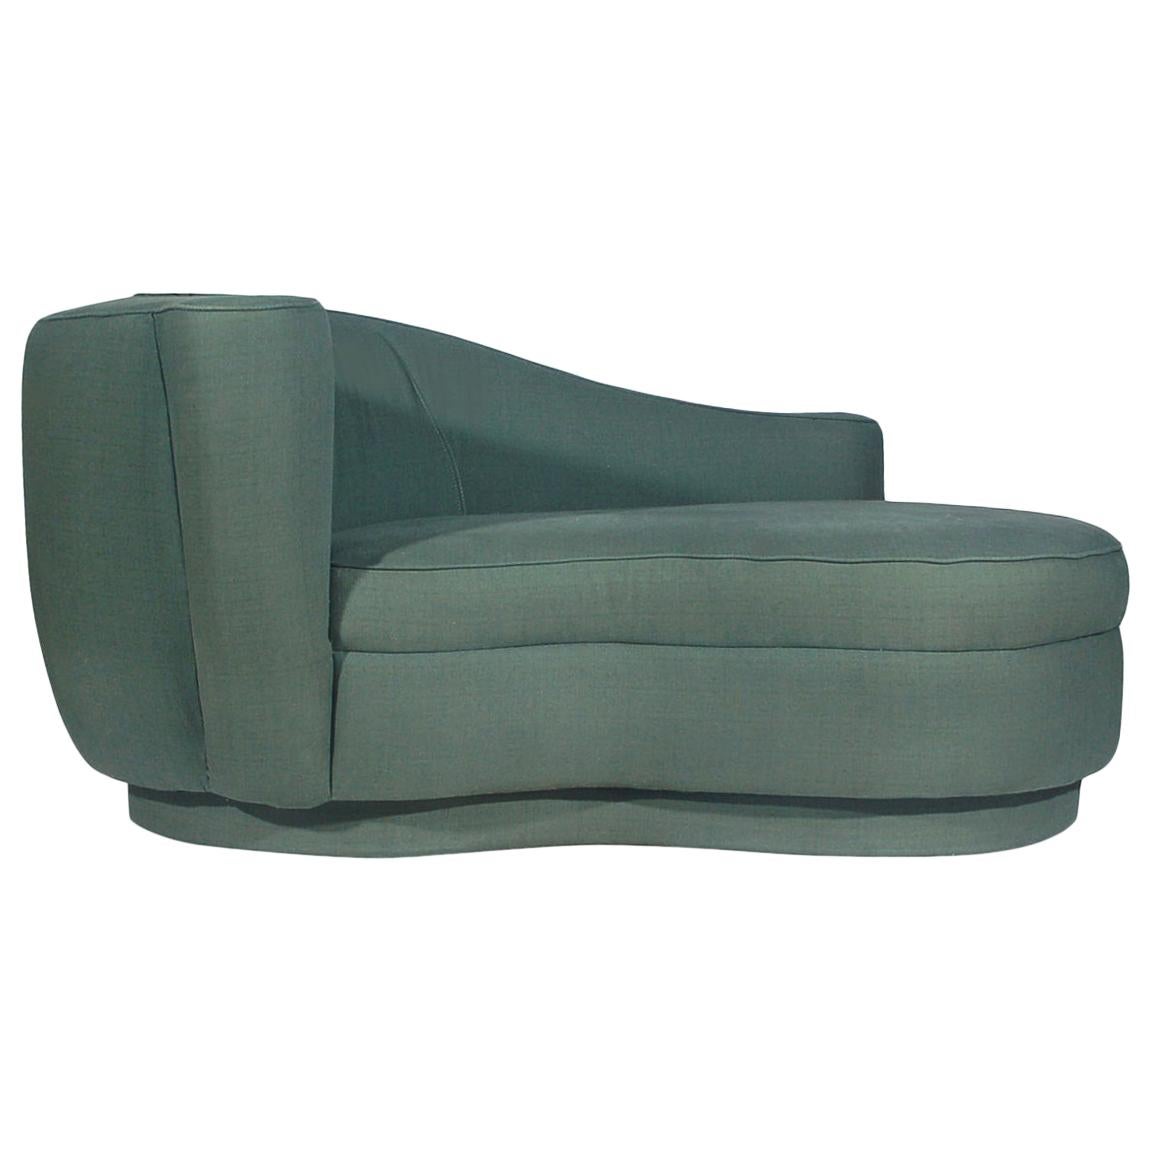 Mid-Century Modern Petite Cloud Sofa, Chaise Lounge or Loveseat with Plinth Base